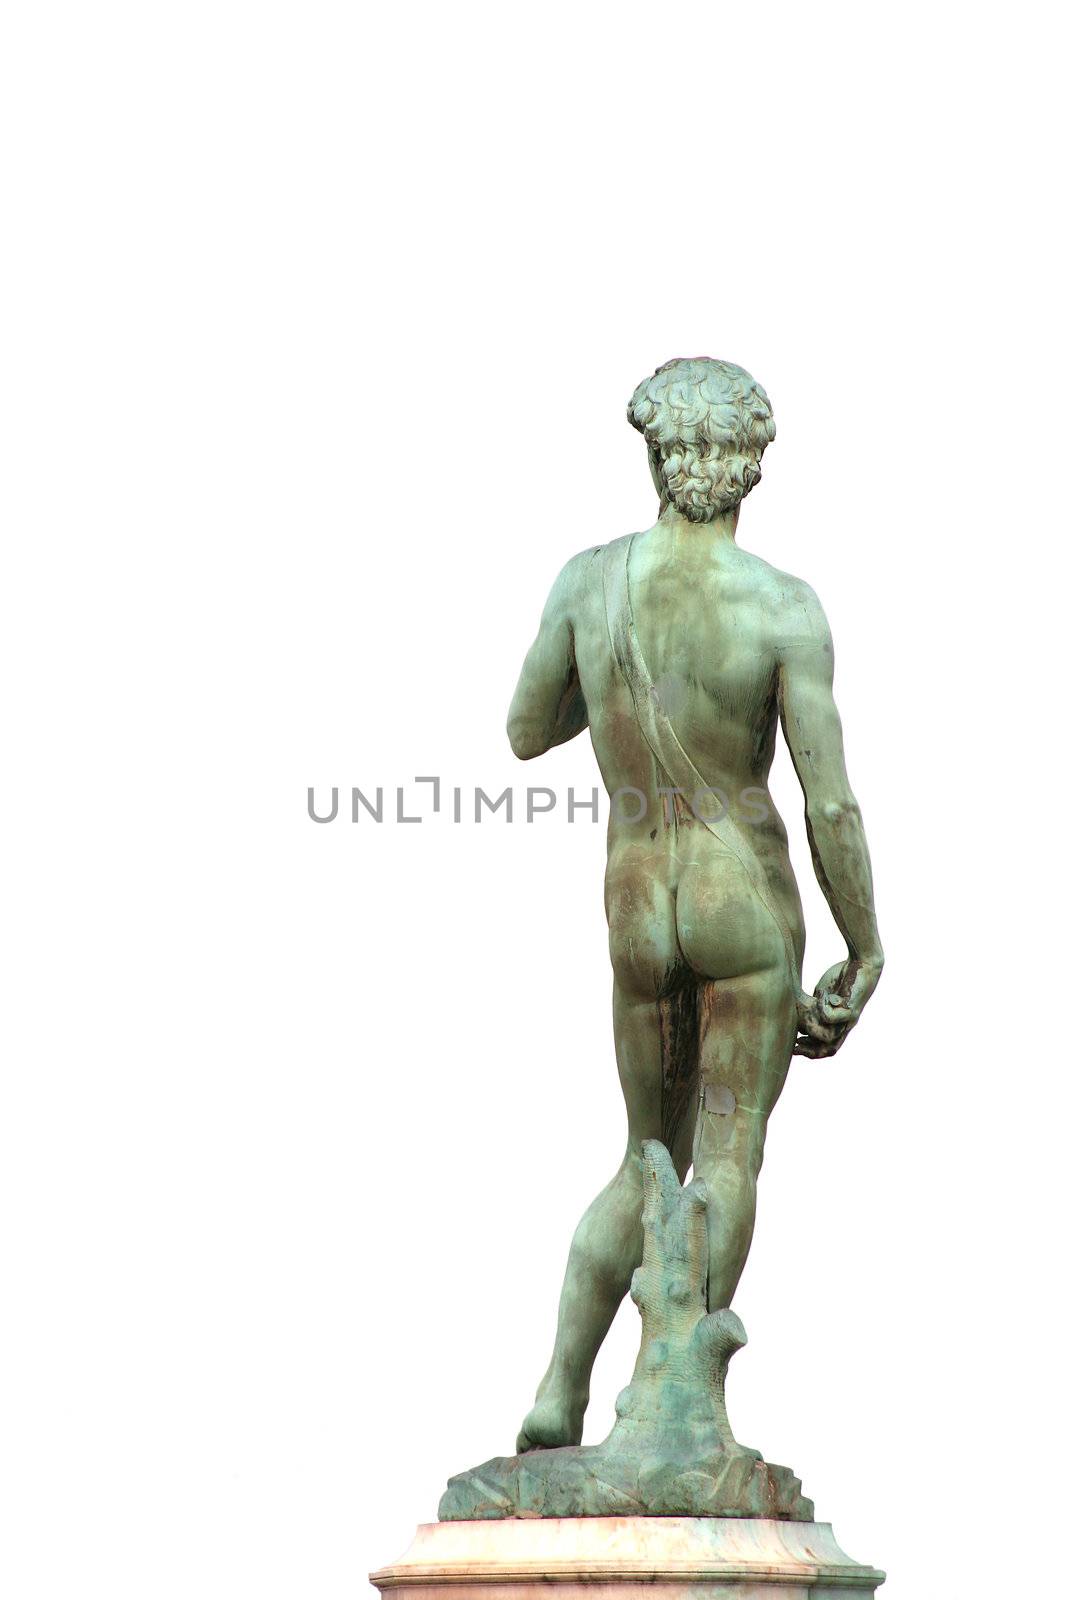 Statue of David  by Michelangelo in Florence, view from back, with clipping path, isolated on white